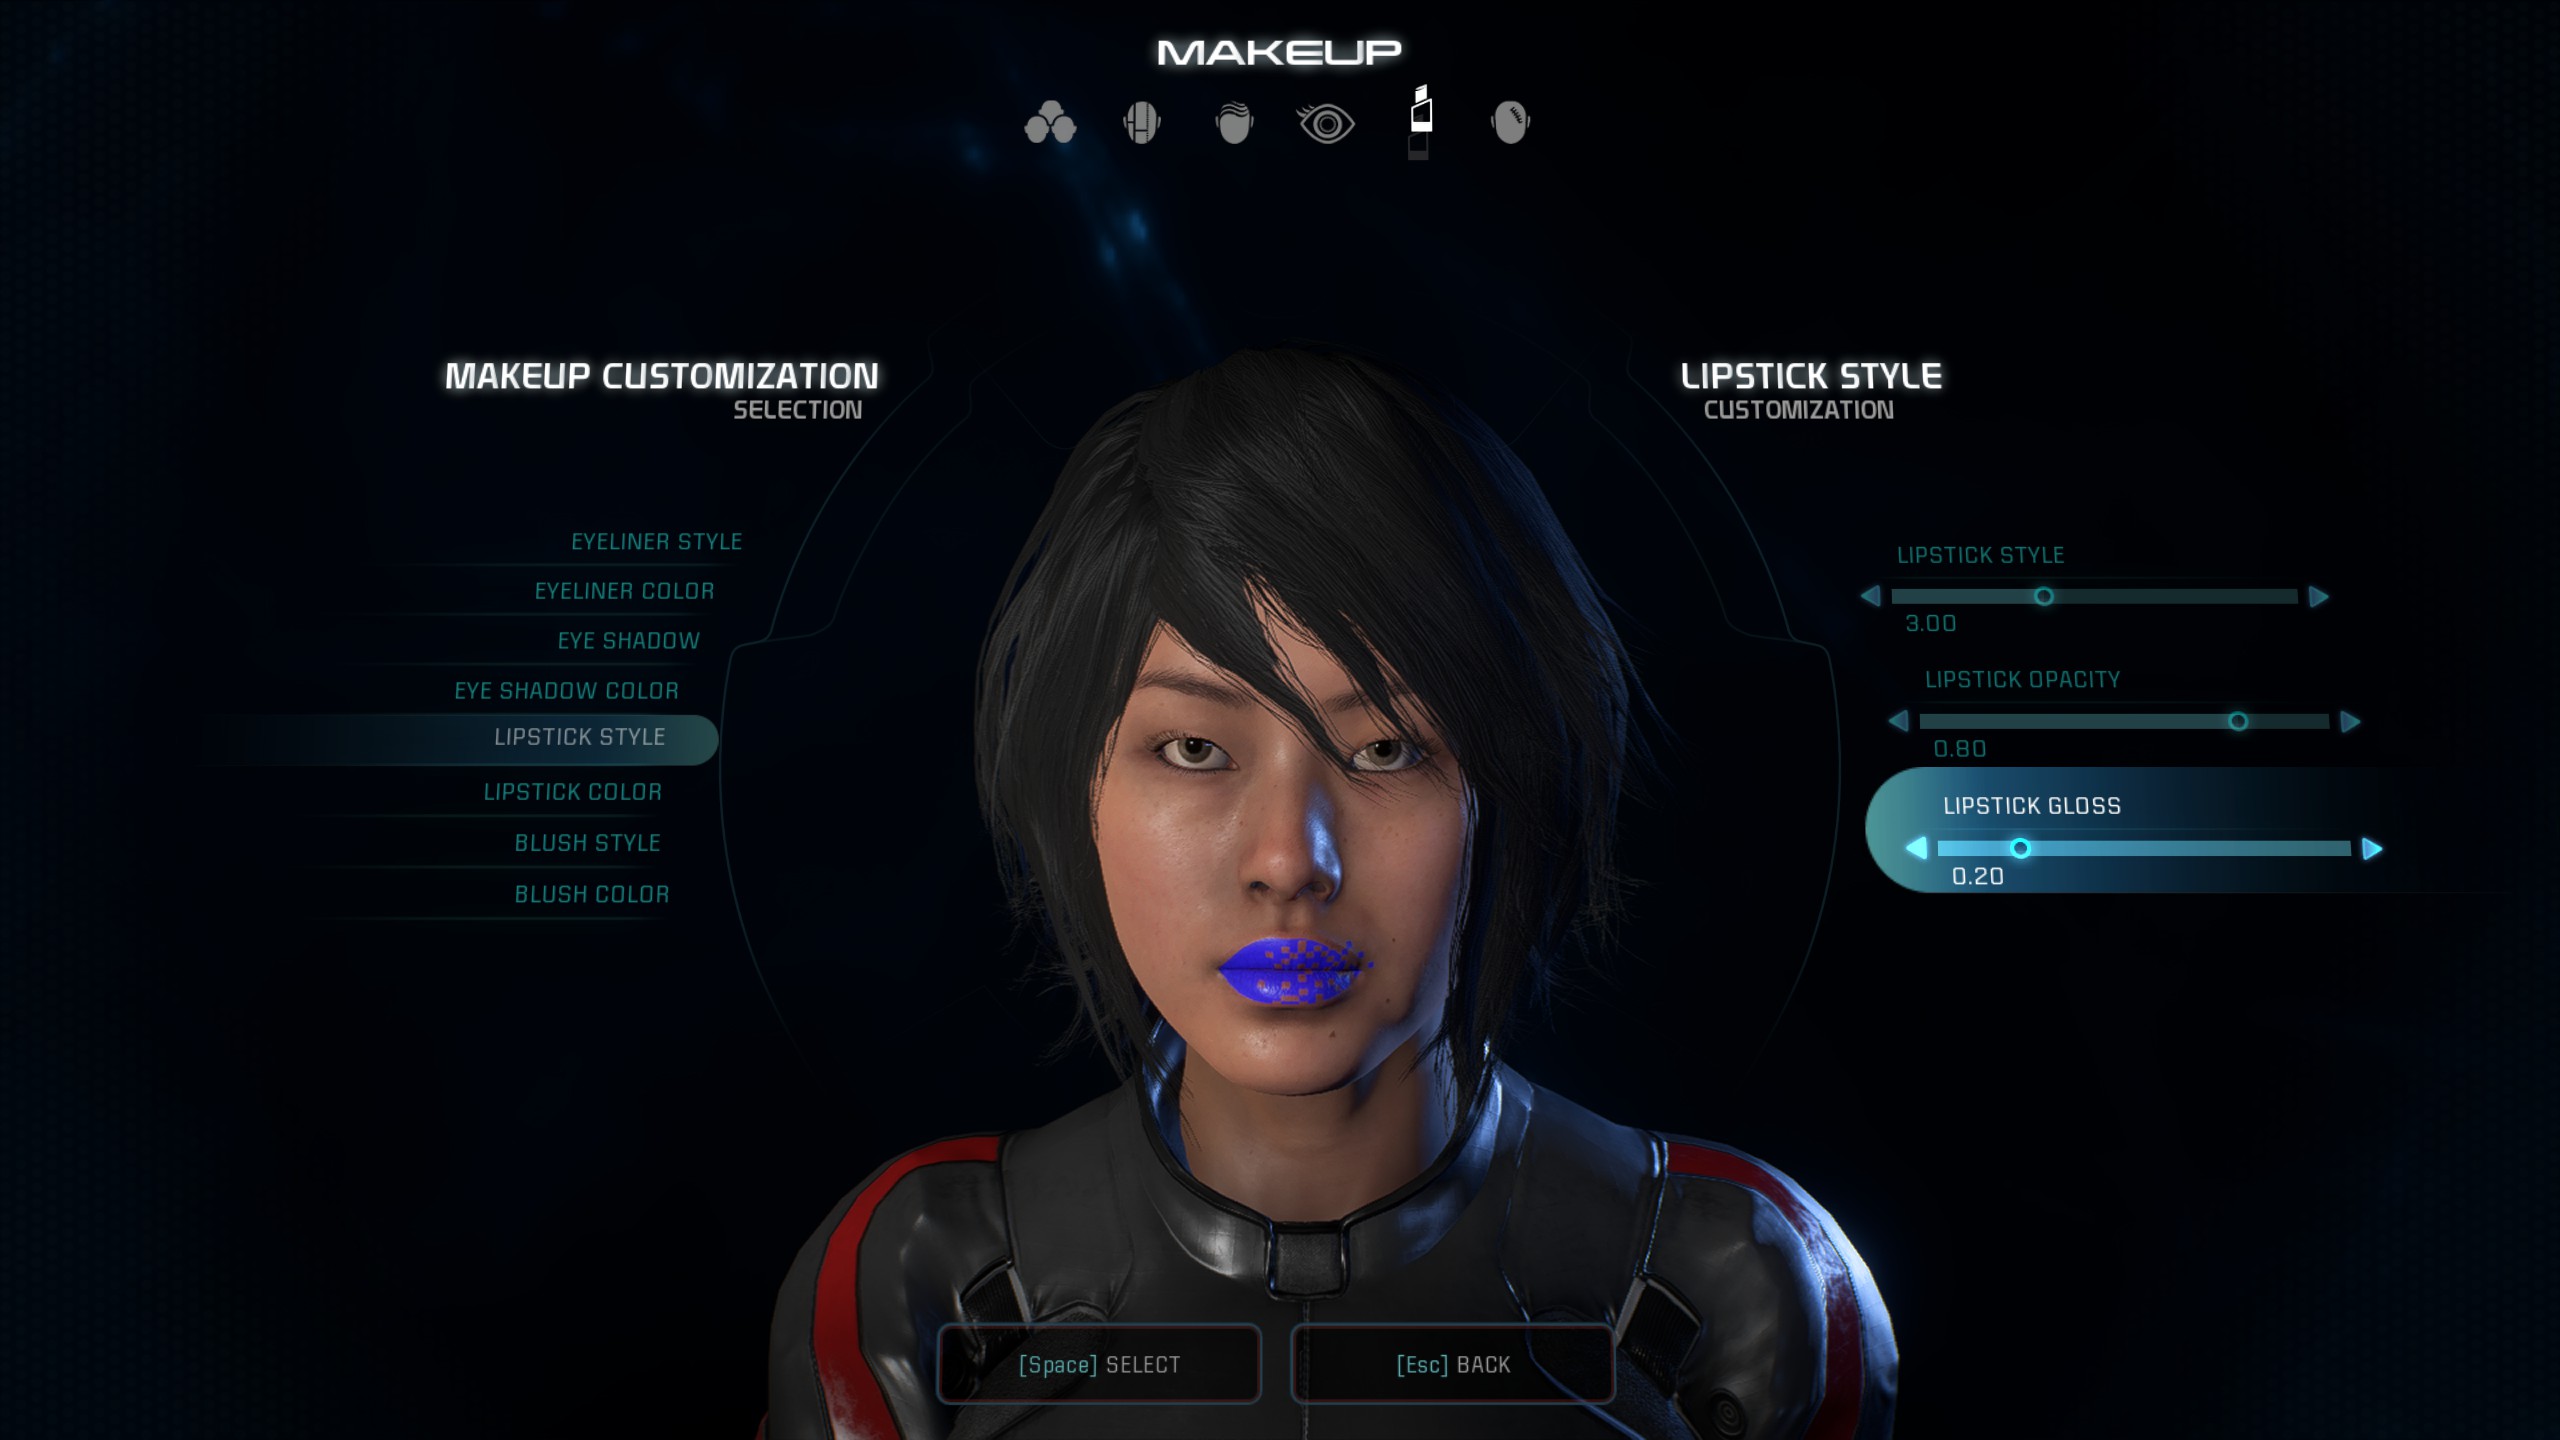 Mass Effect Andromeda Lipstick Style Comparison With GirlGreyBeauty #2